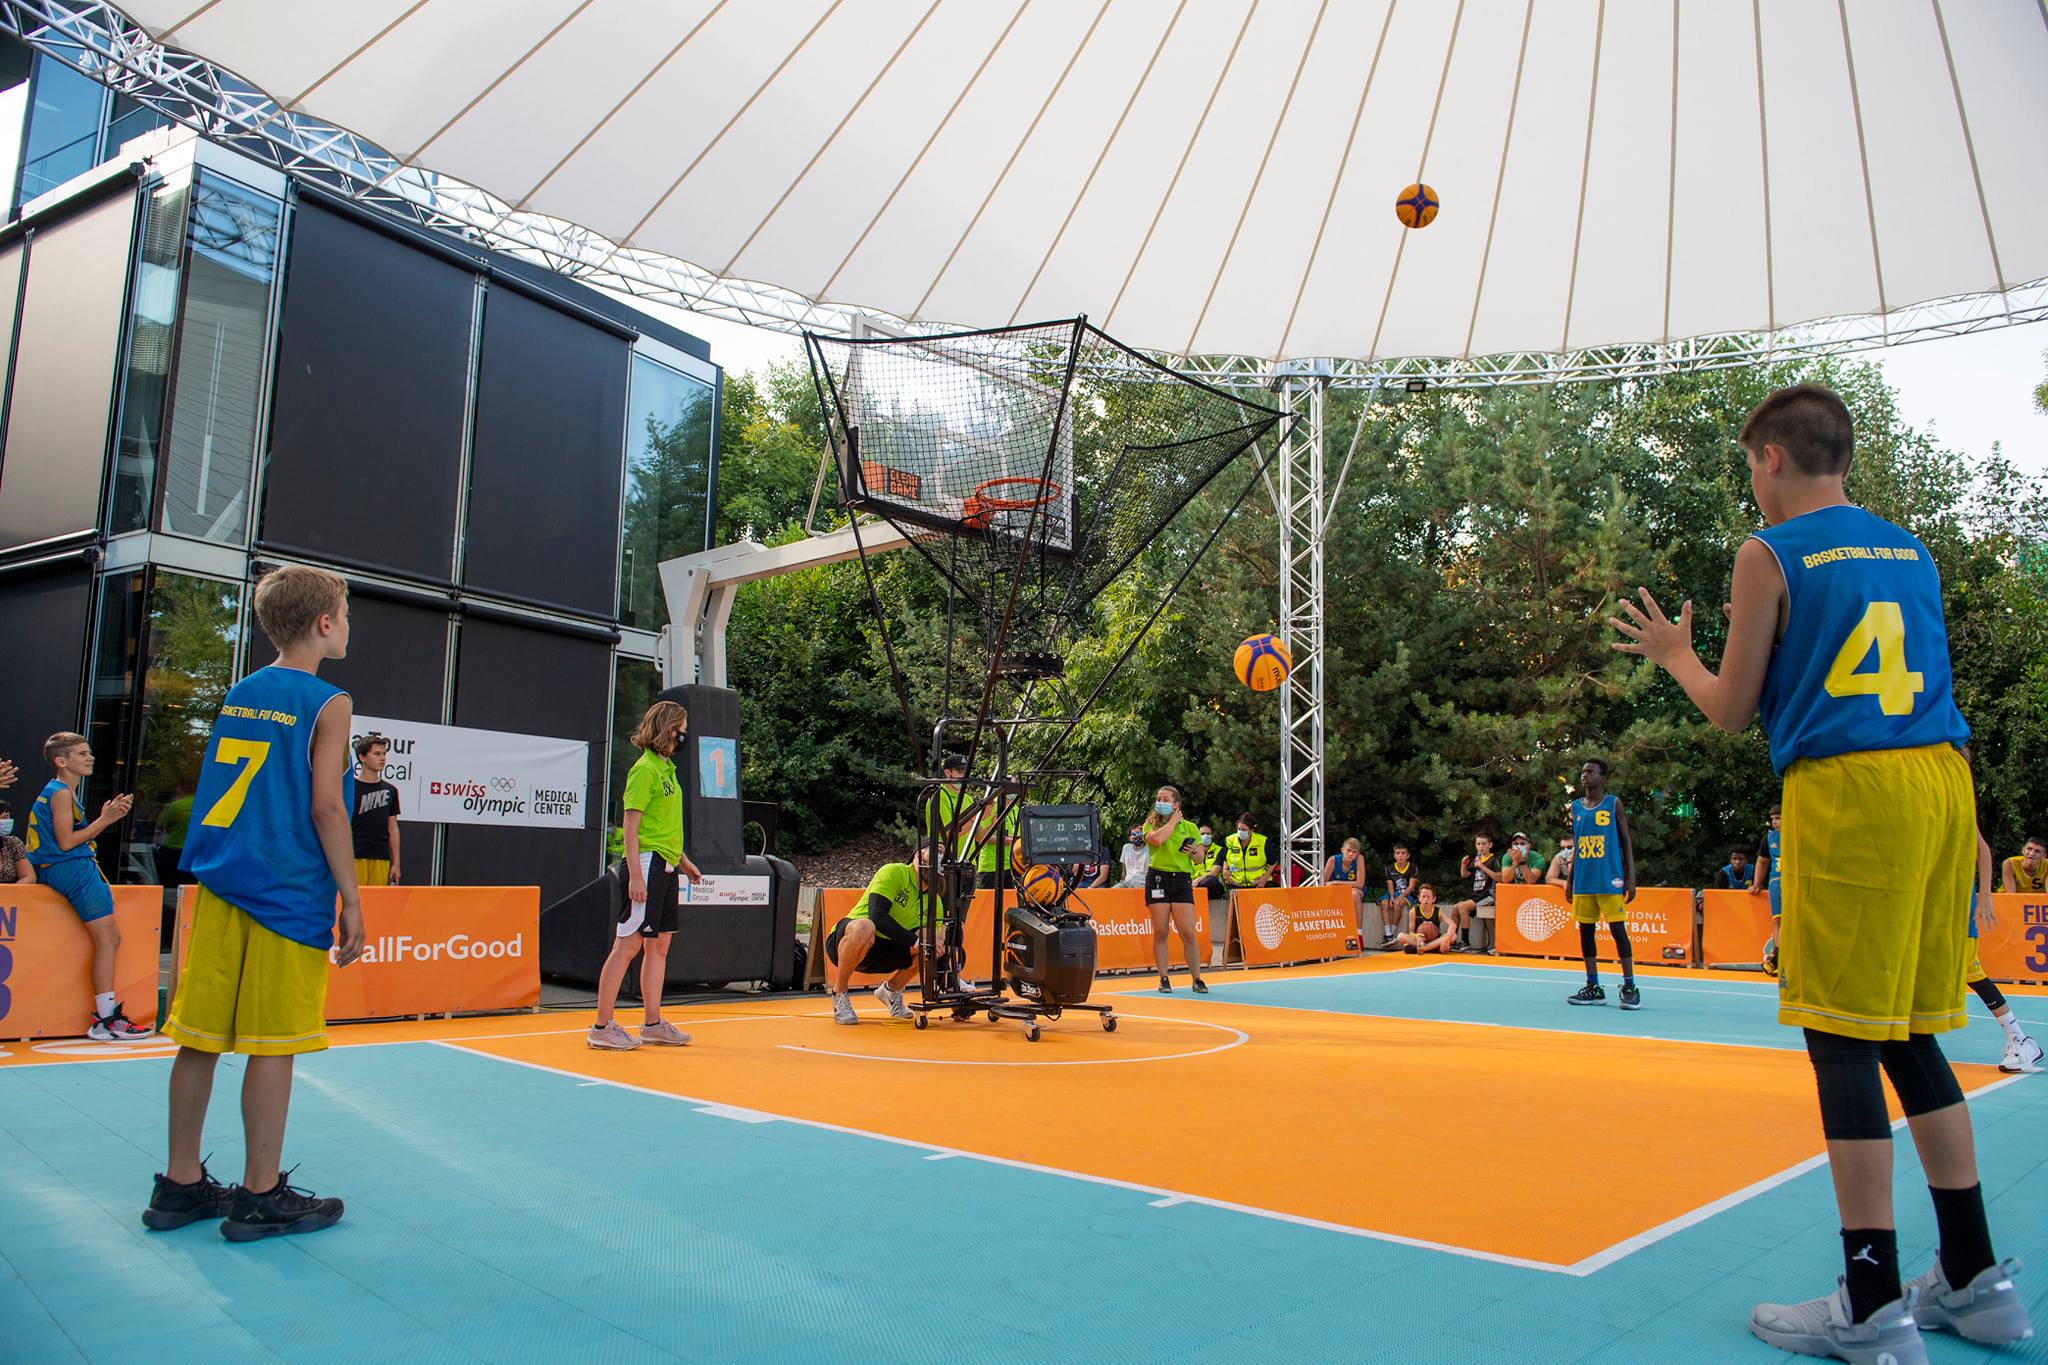 Dr. Dish Basketball Expands Distribution Network Throughout Europe